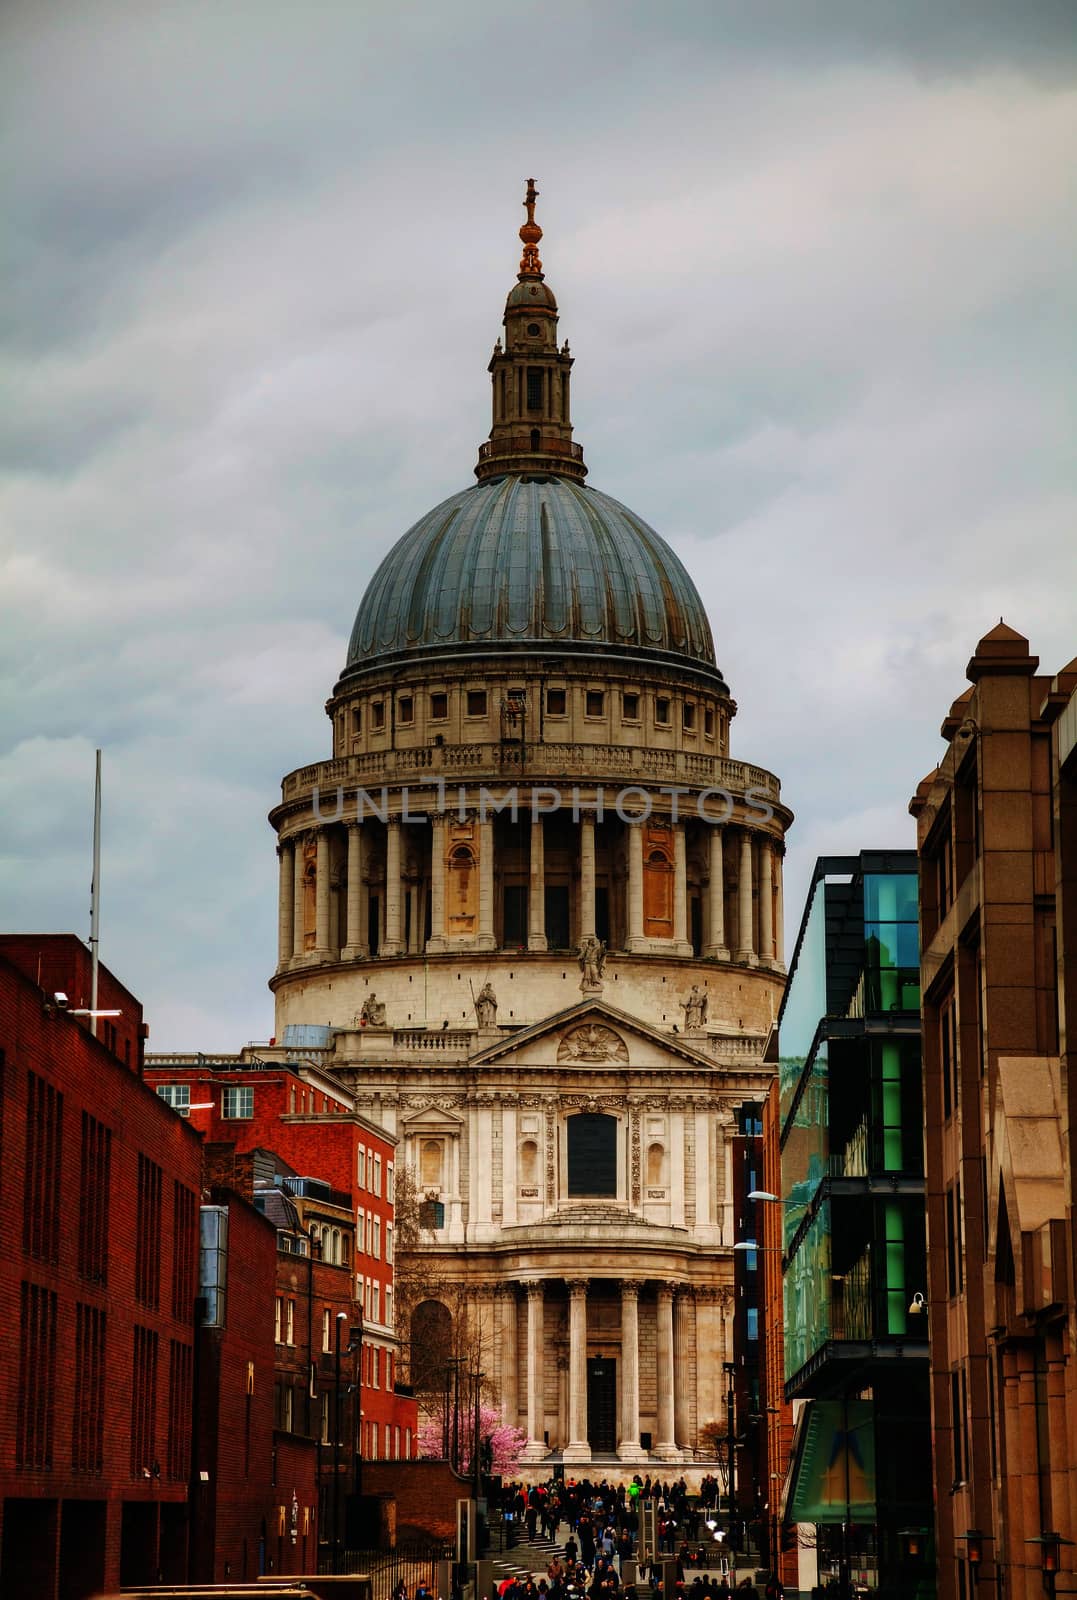 Saint Paul cathedral in London by AndreyKr